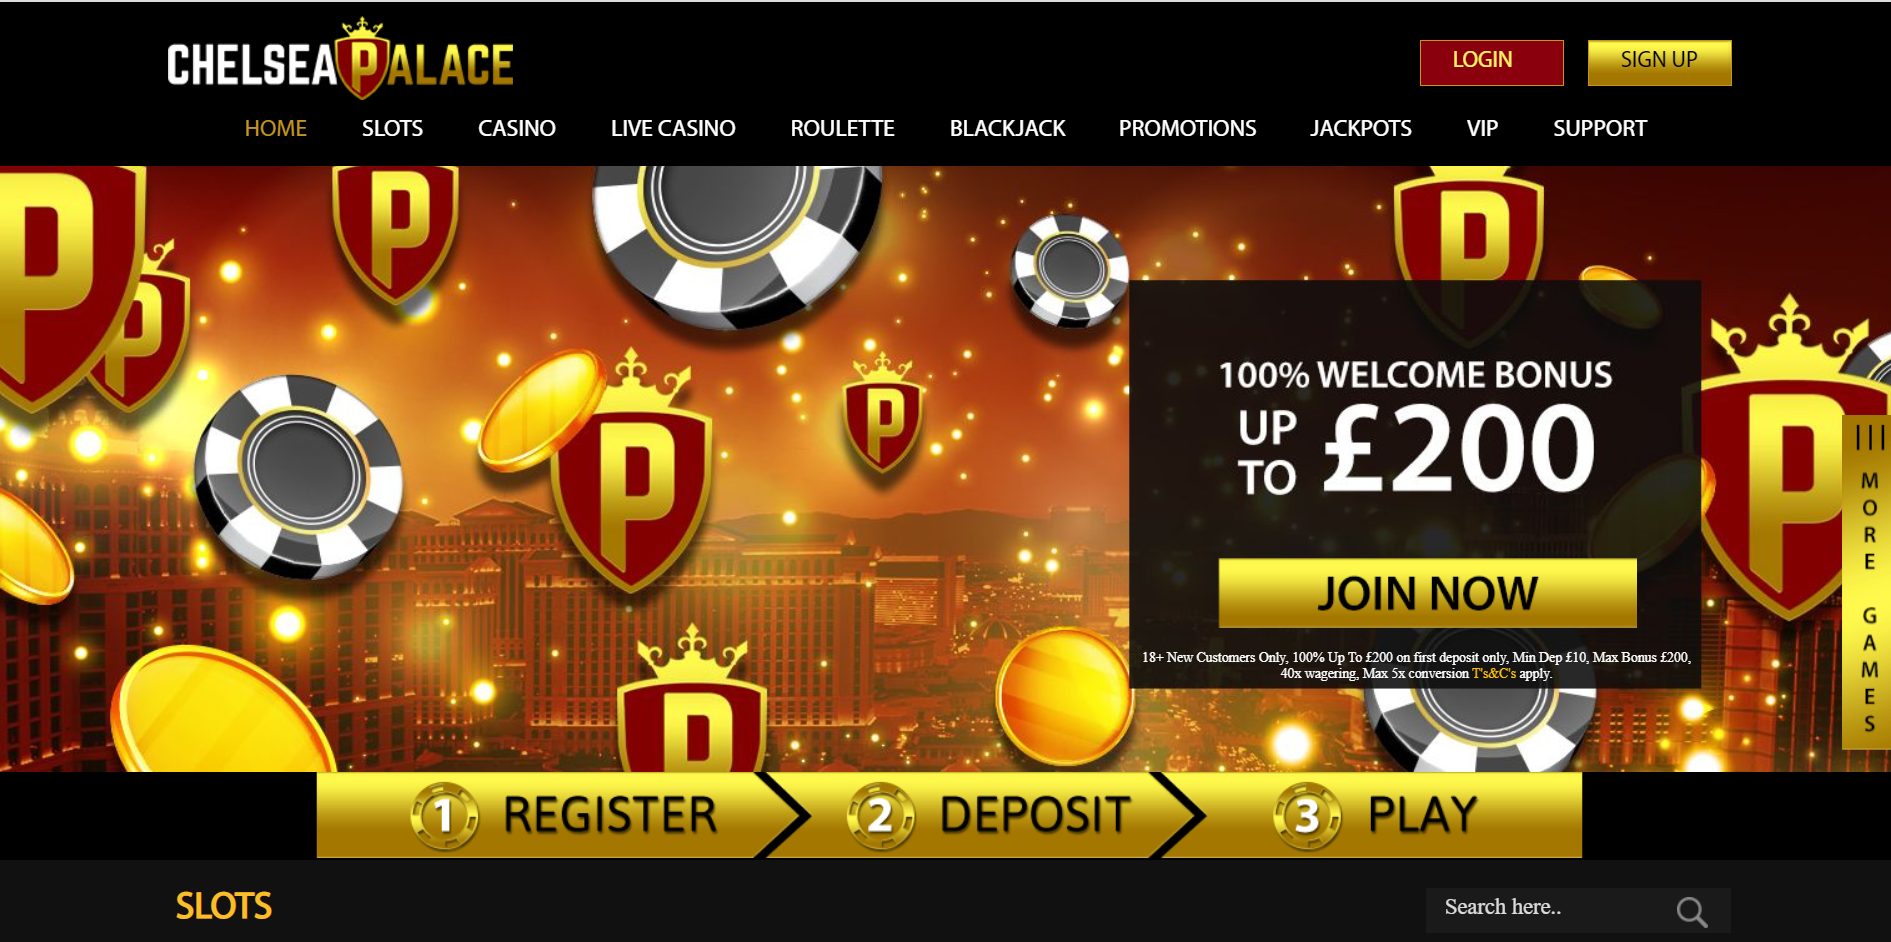 Chelsea Palace Casino Review